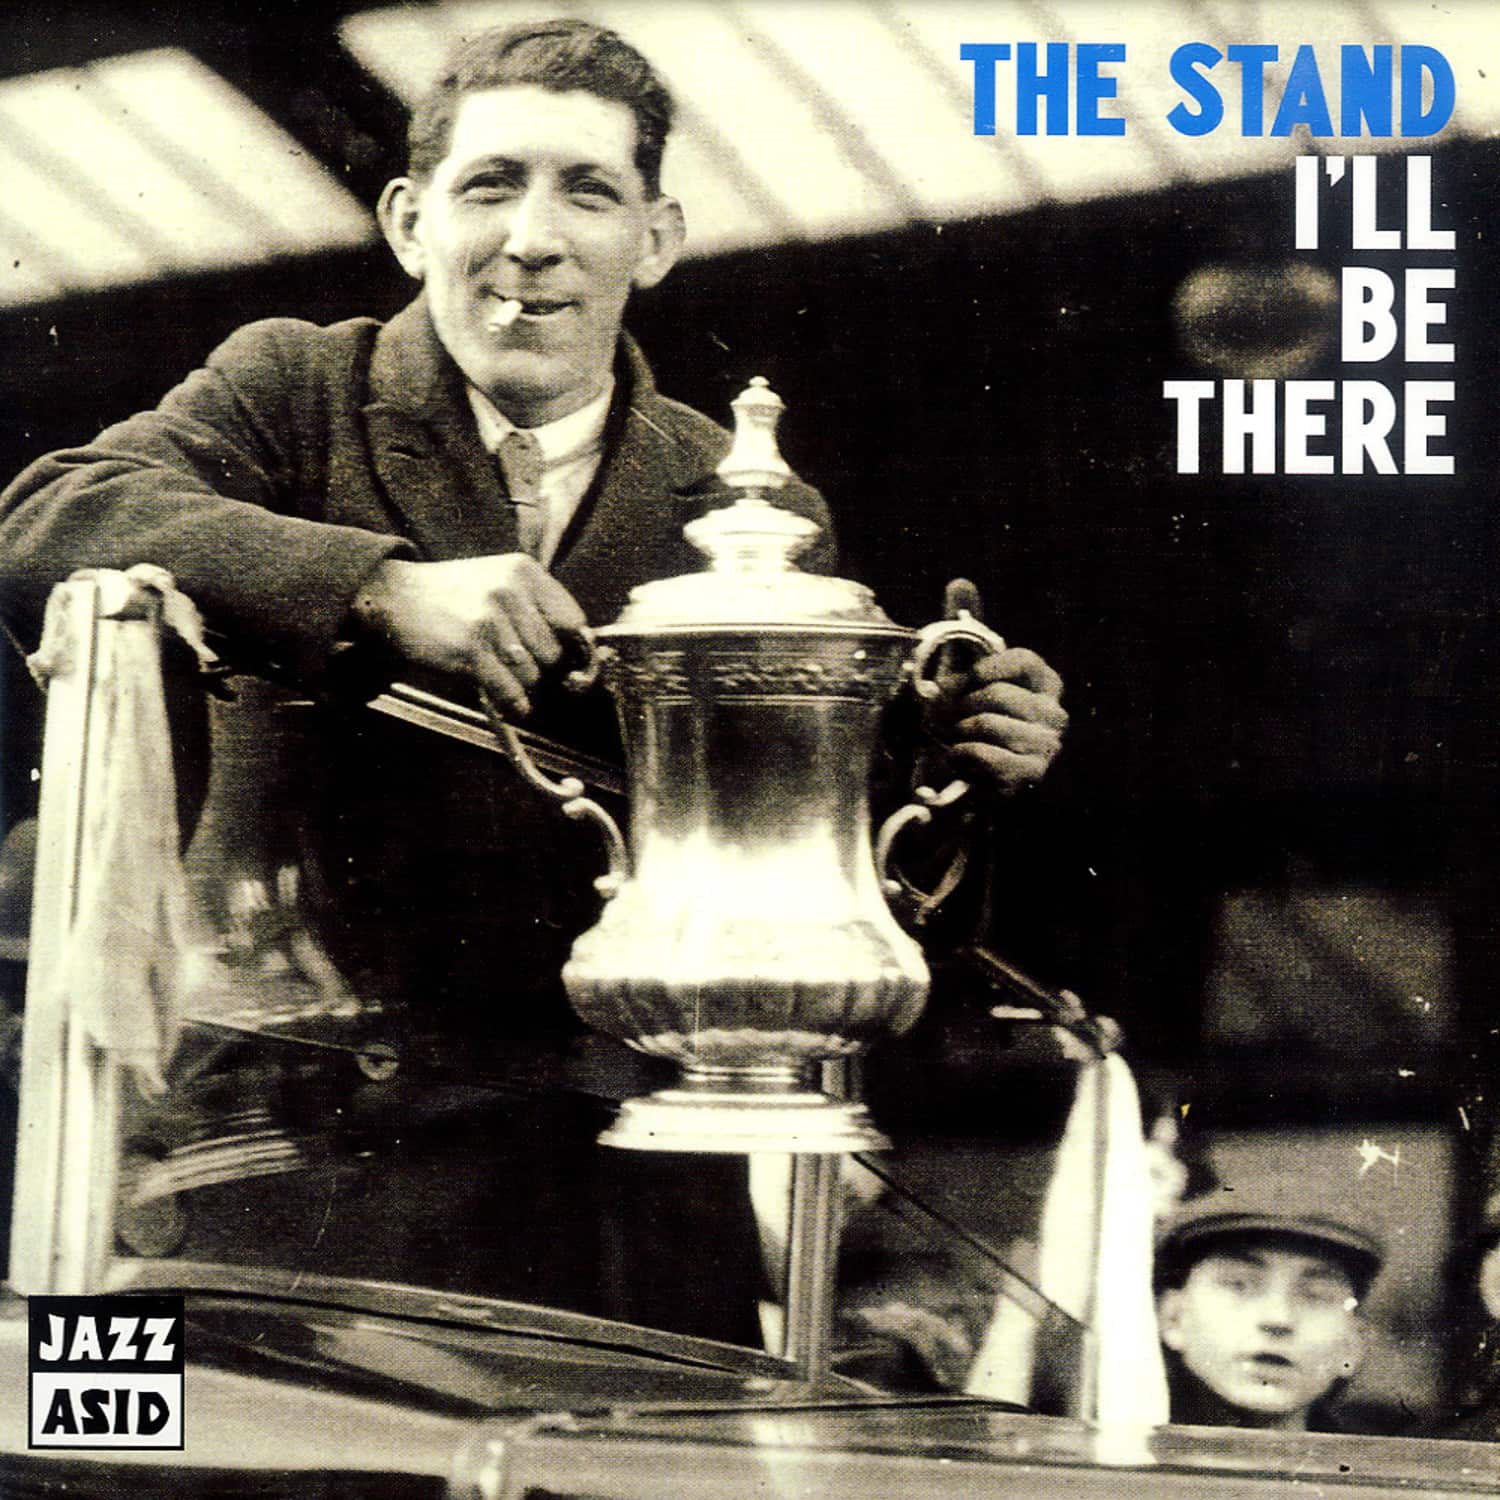 The Stand - I LL BE THERE 